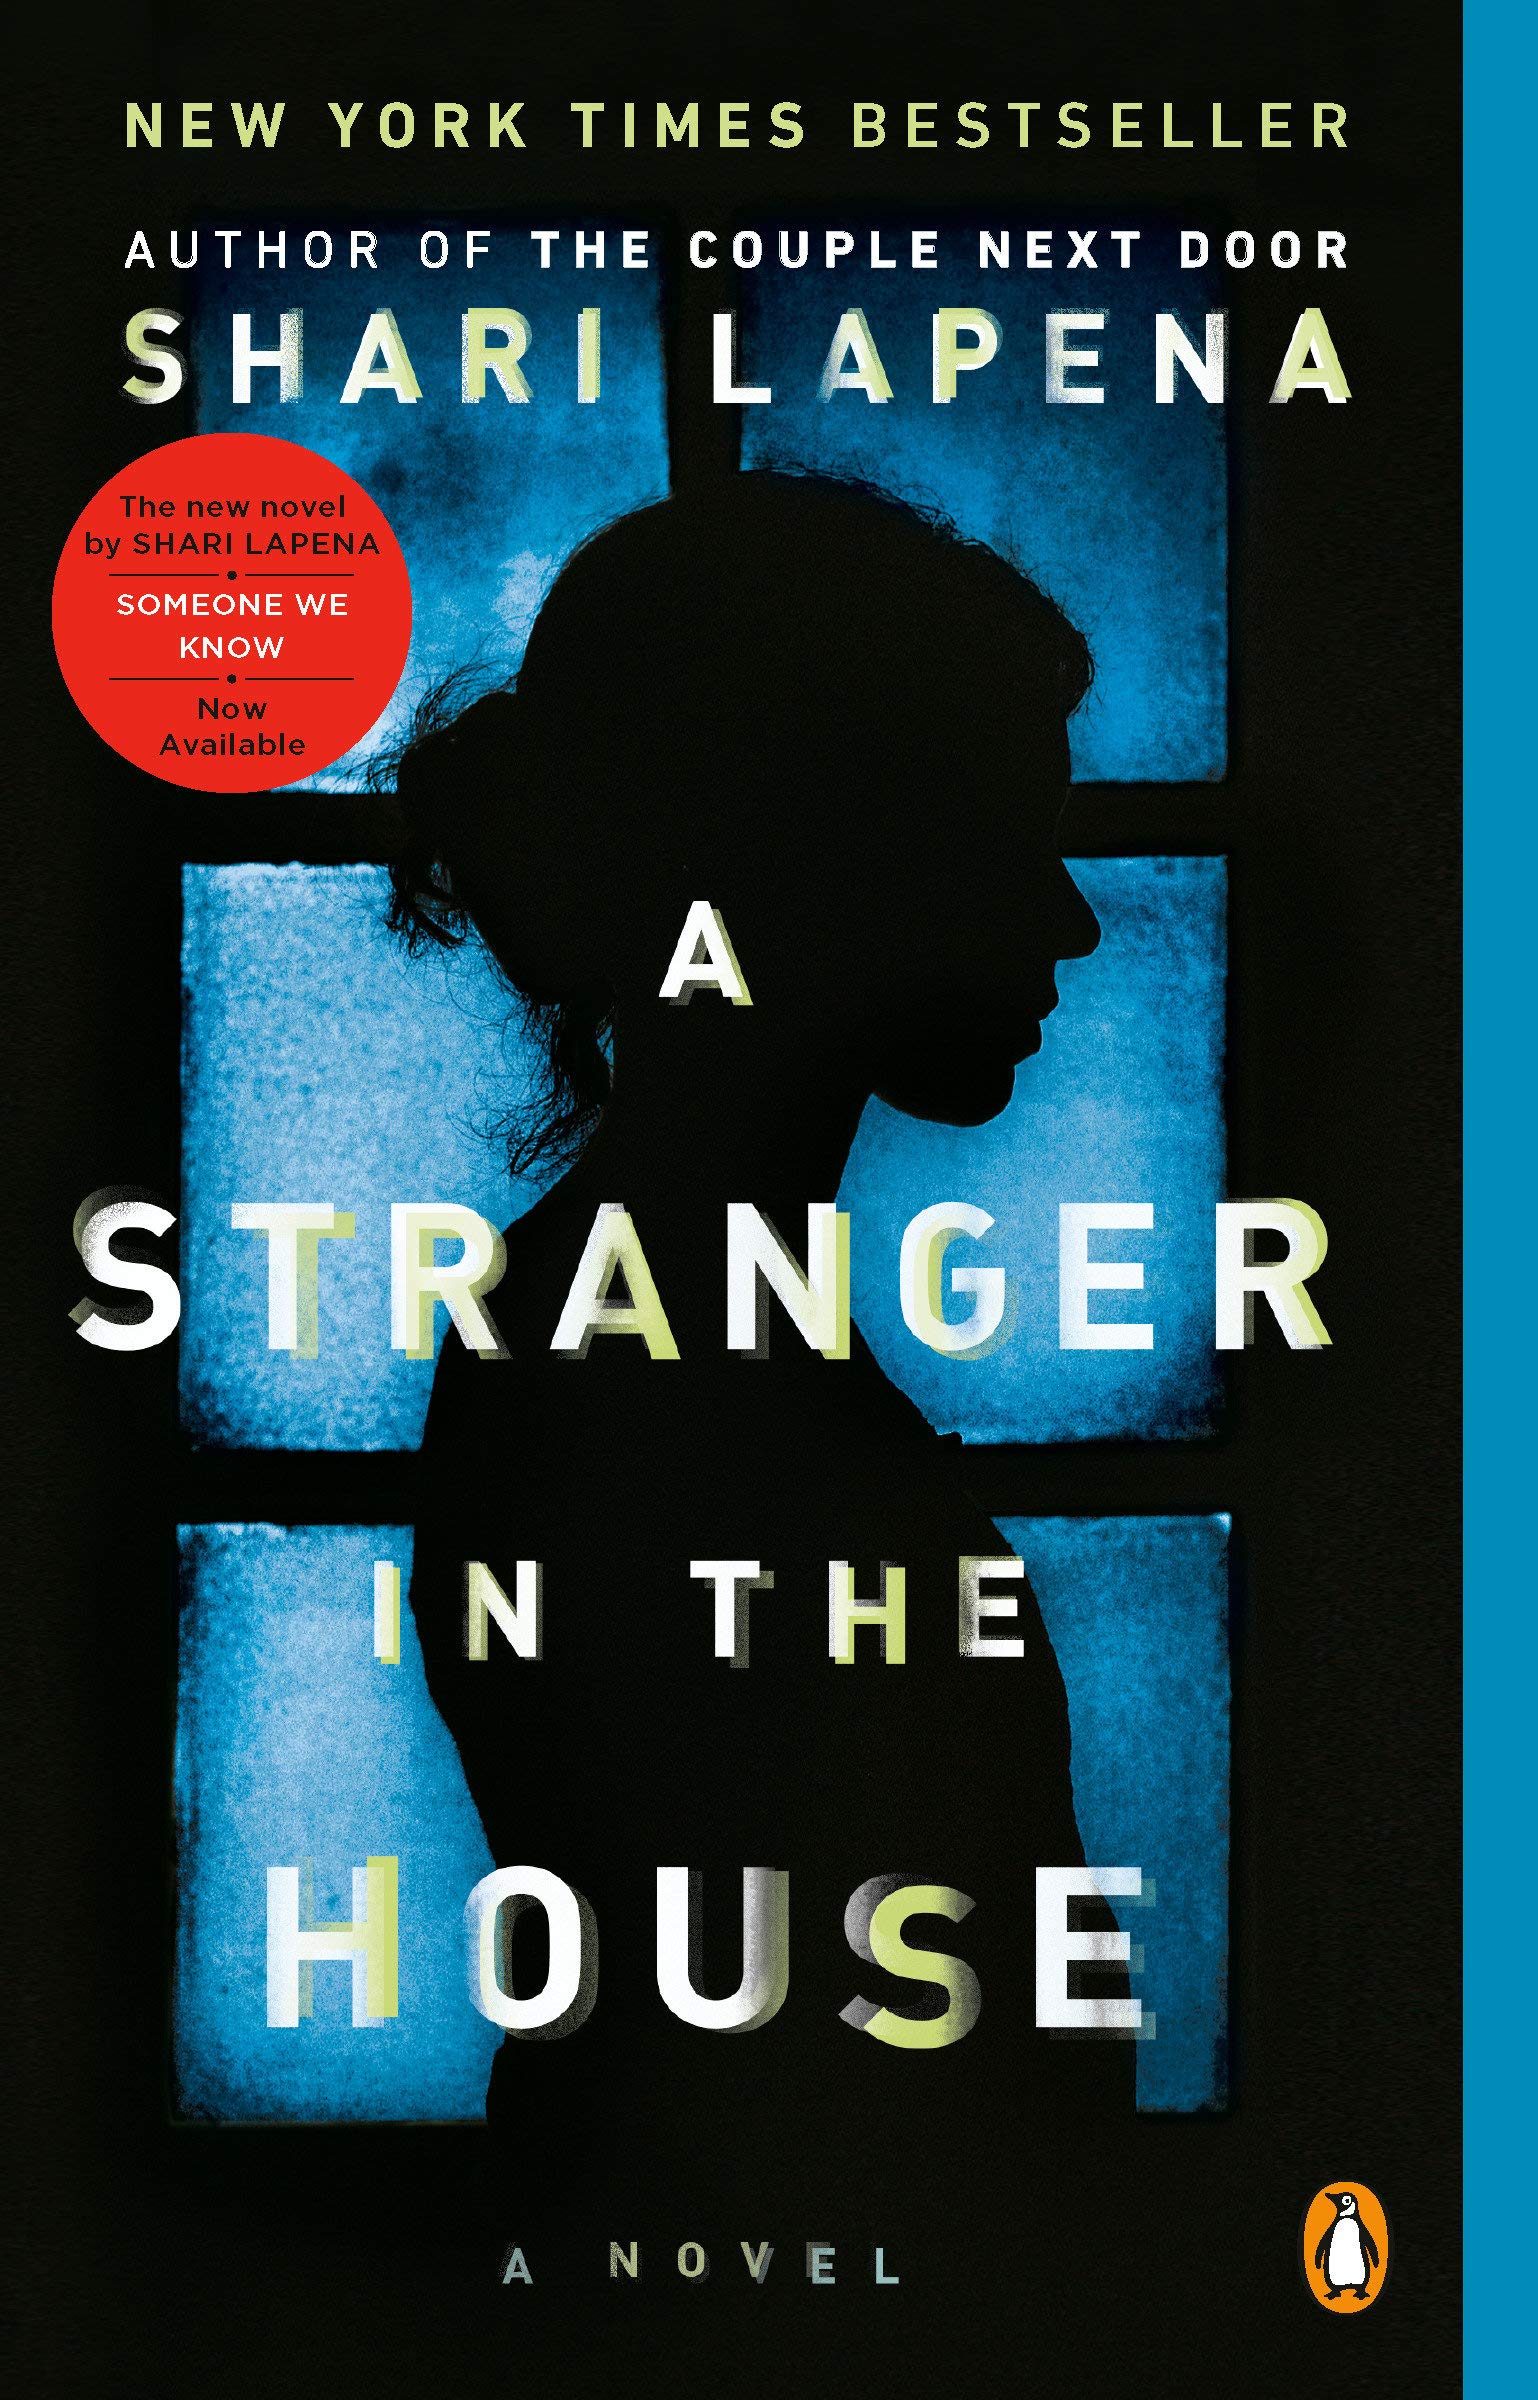 Image for "A Stranger in the House"